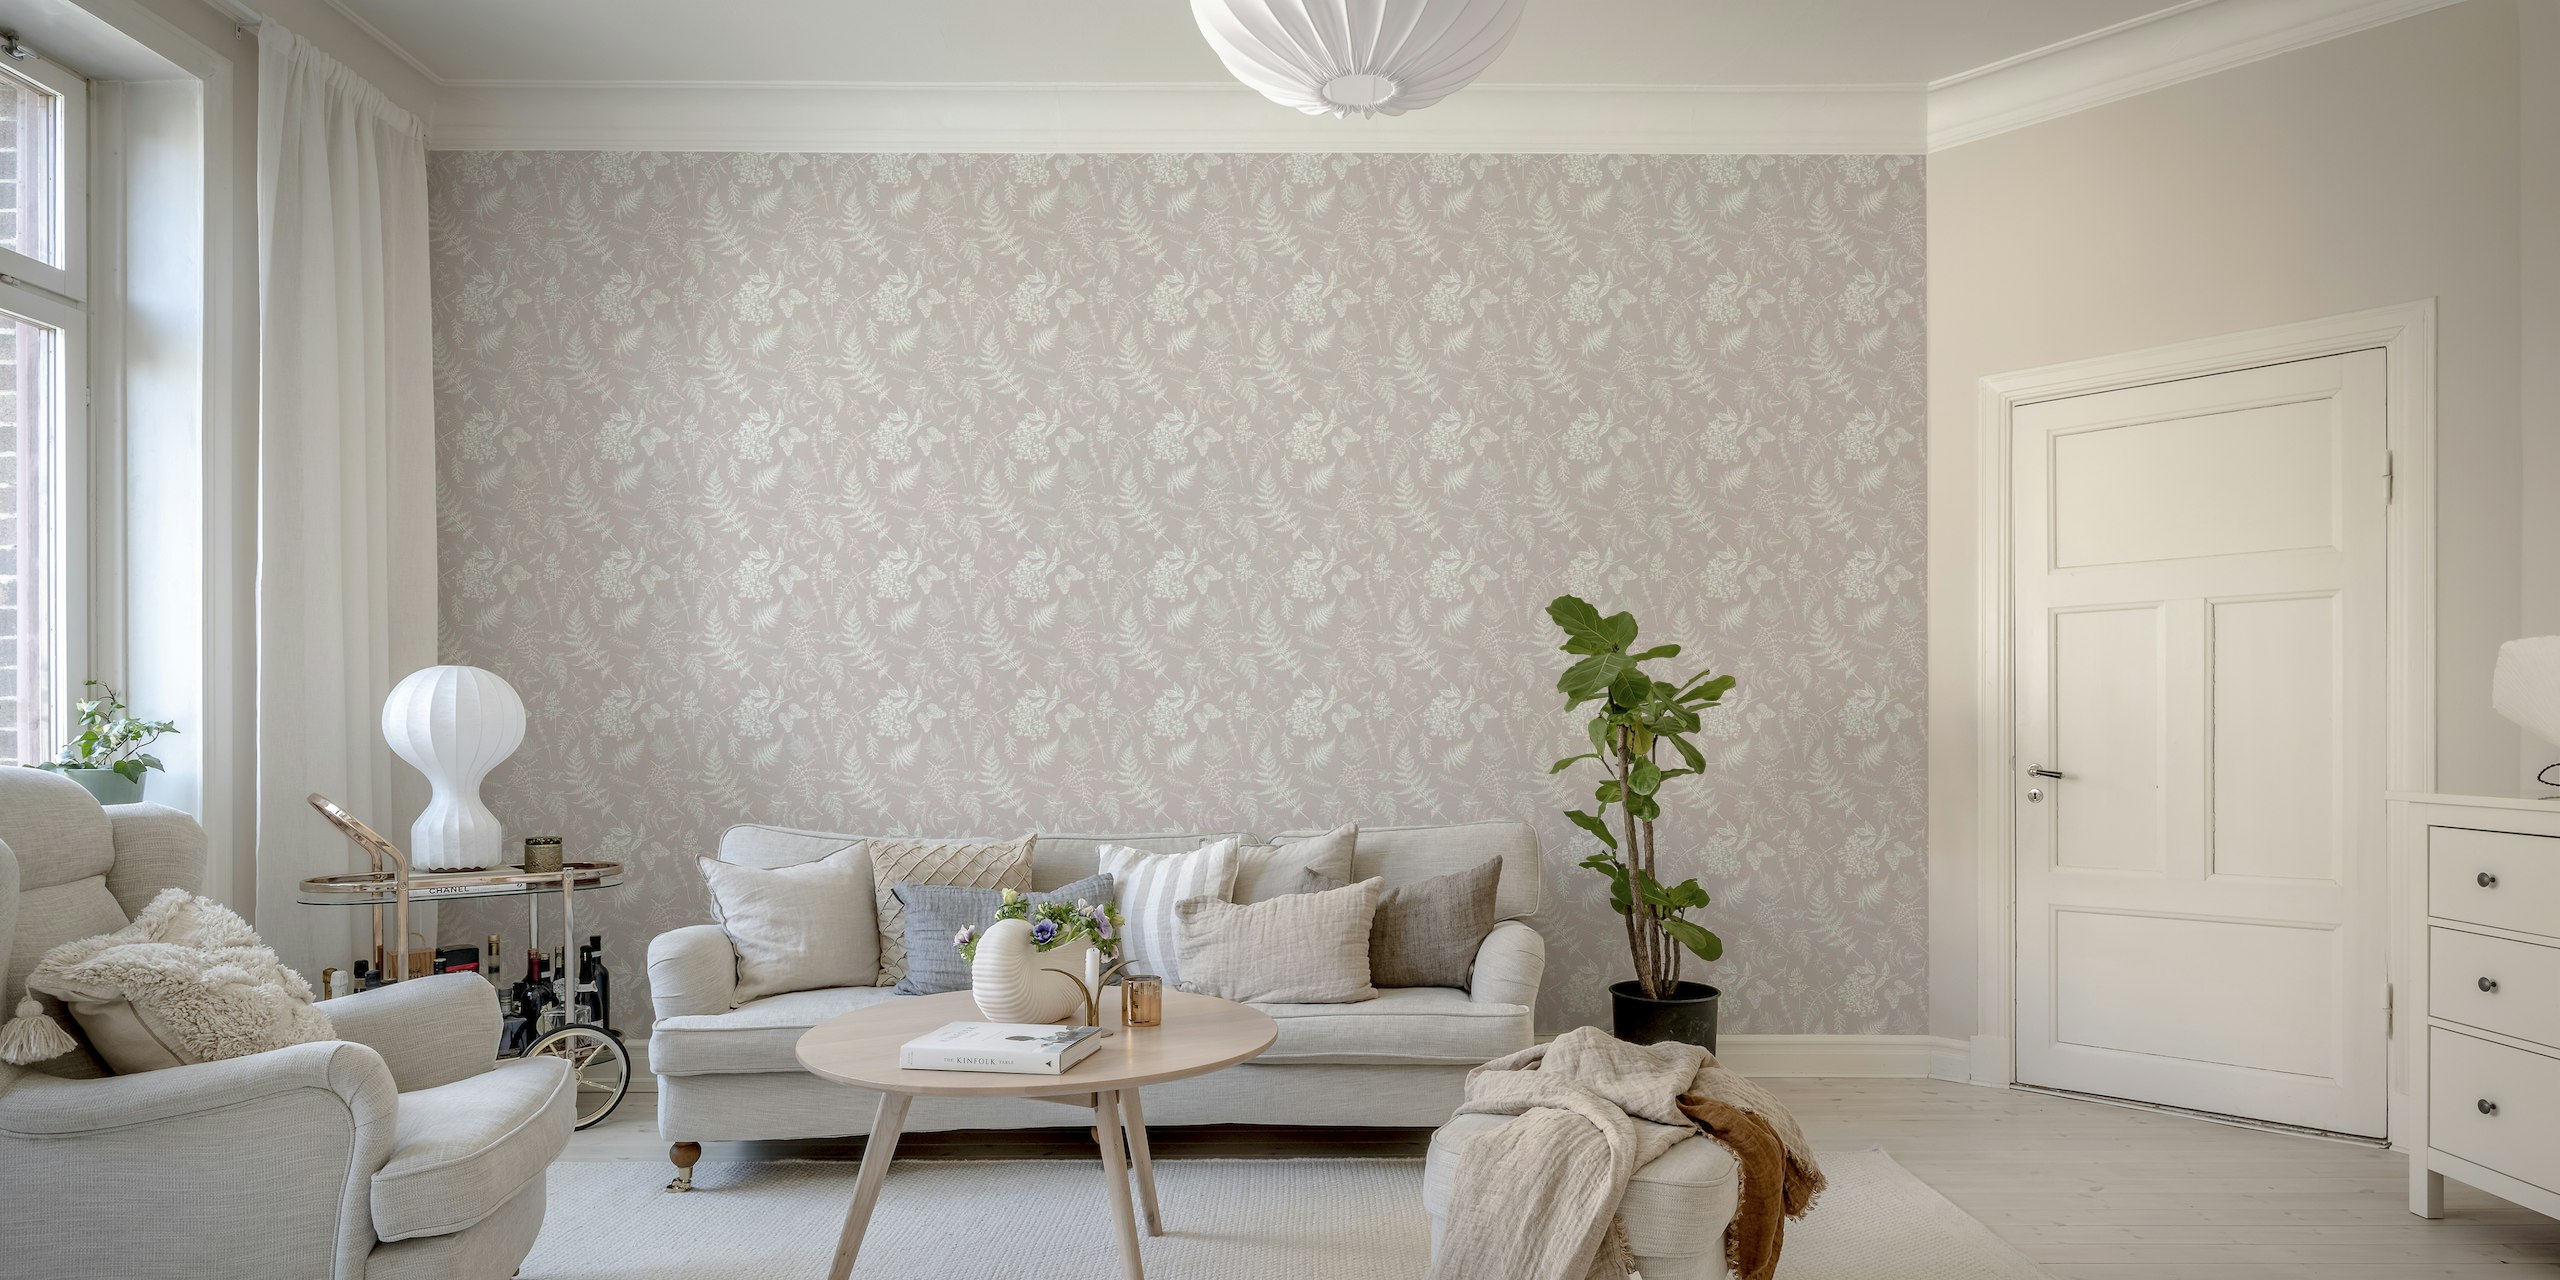 Neutral toned fern and foliage pattern wall mural